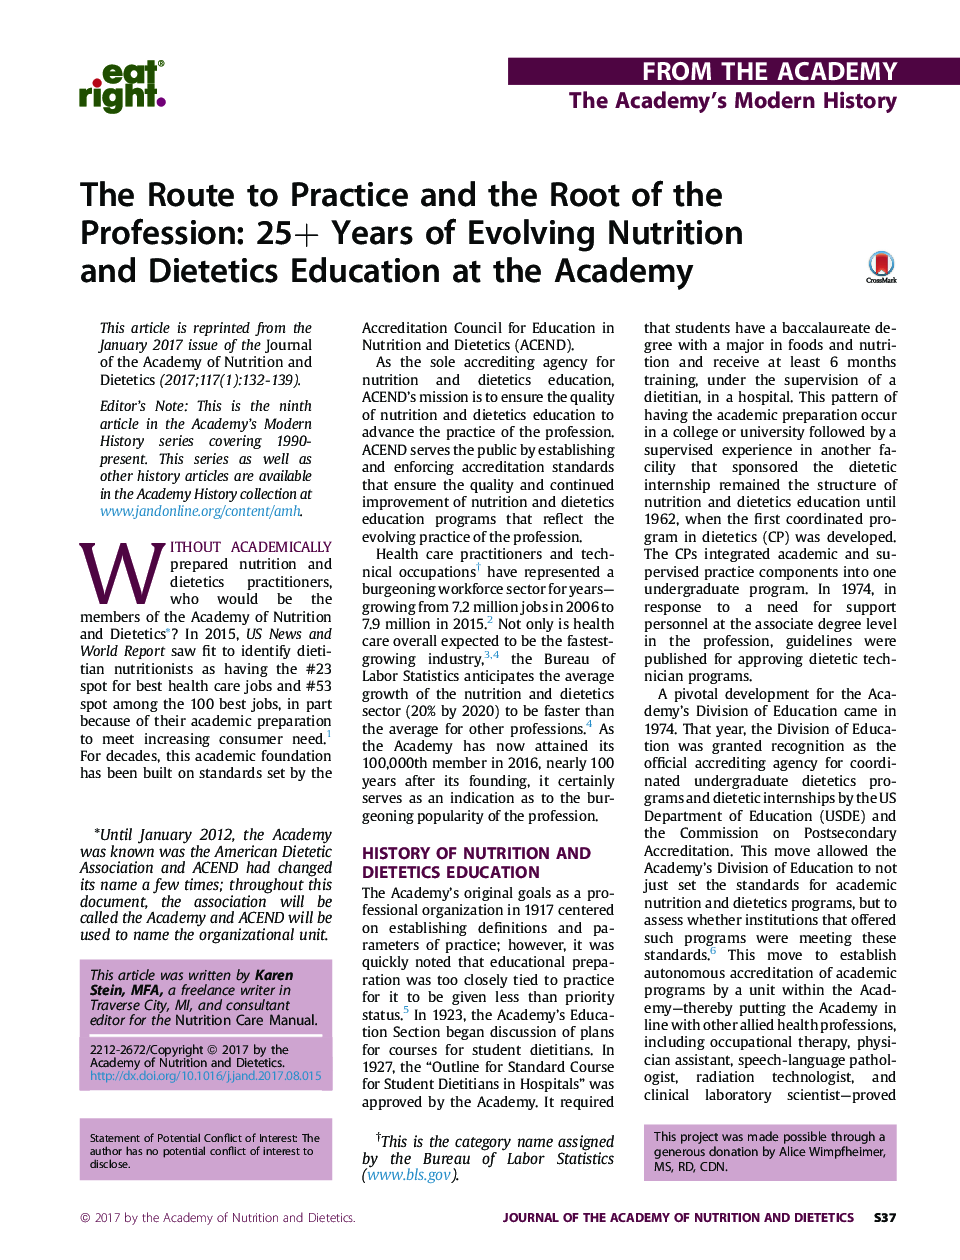 The Route to Practice and the Root of the Profession: 25+ Years of Evolving Nutrition andÂ Dietetics Education at the Academy